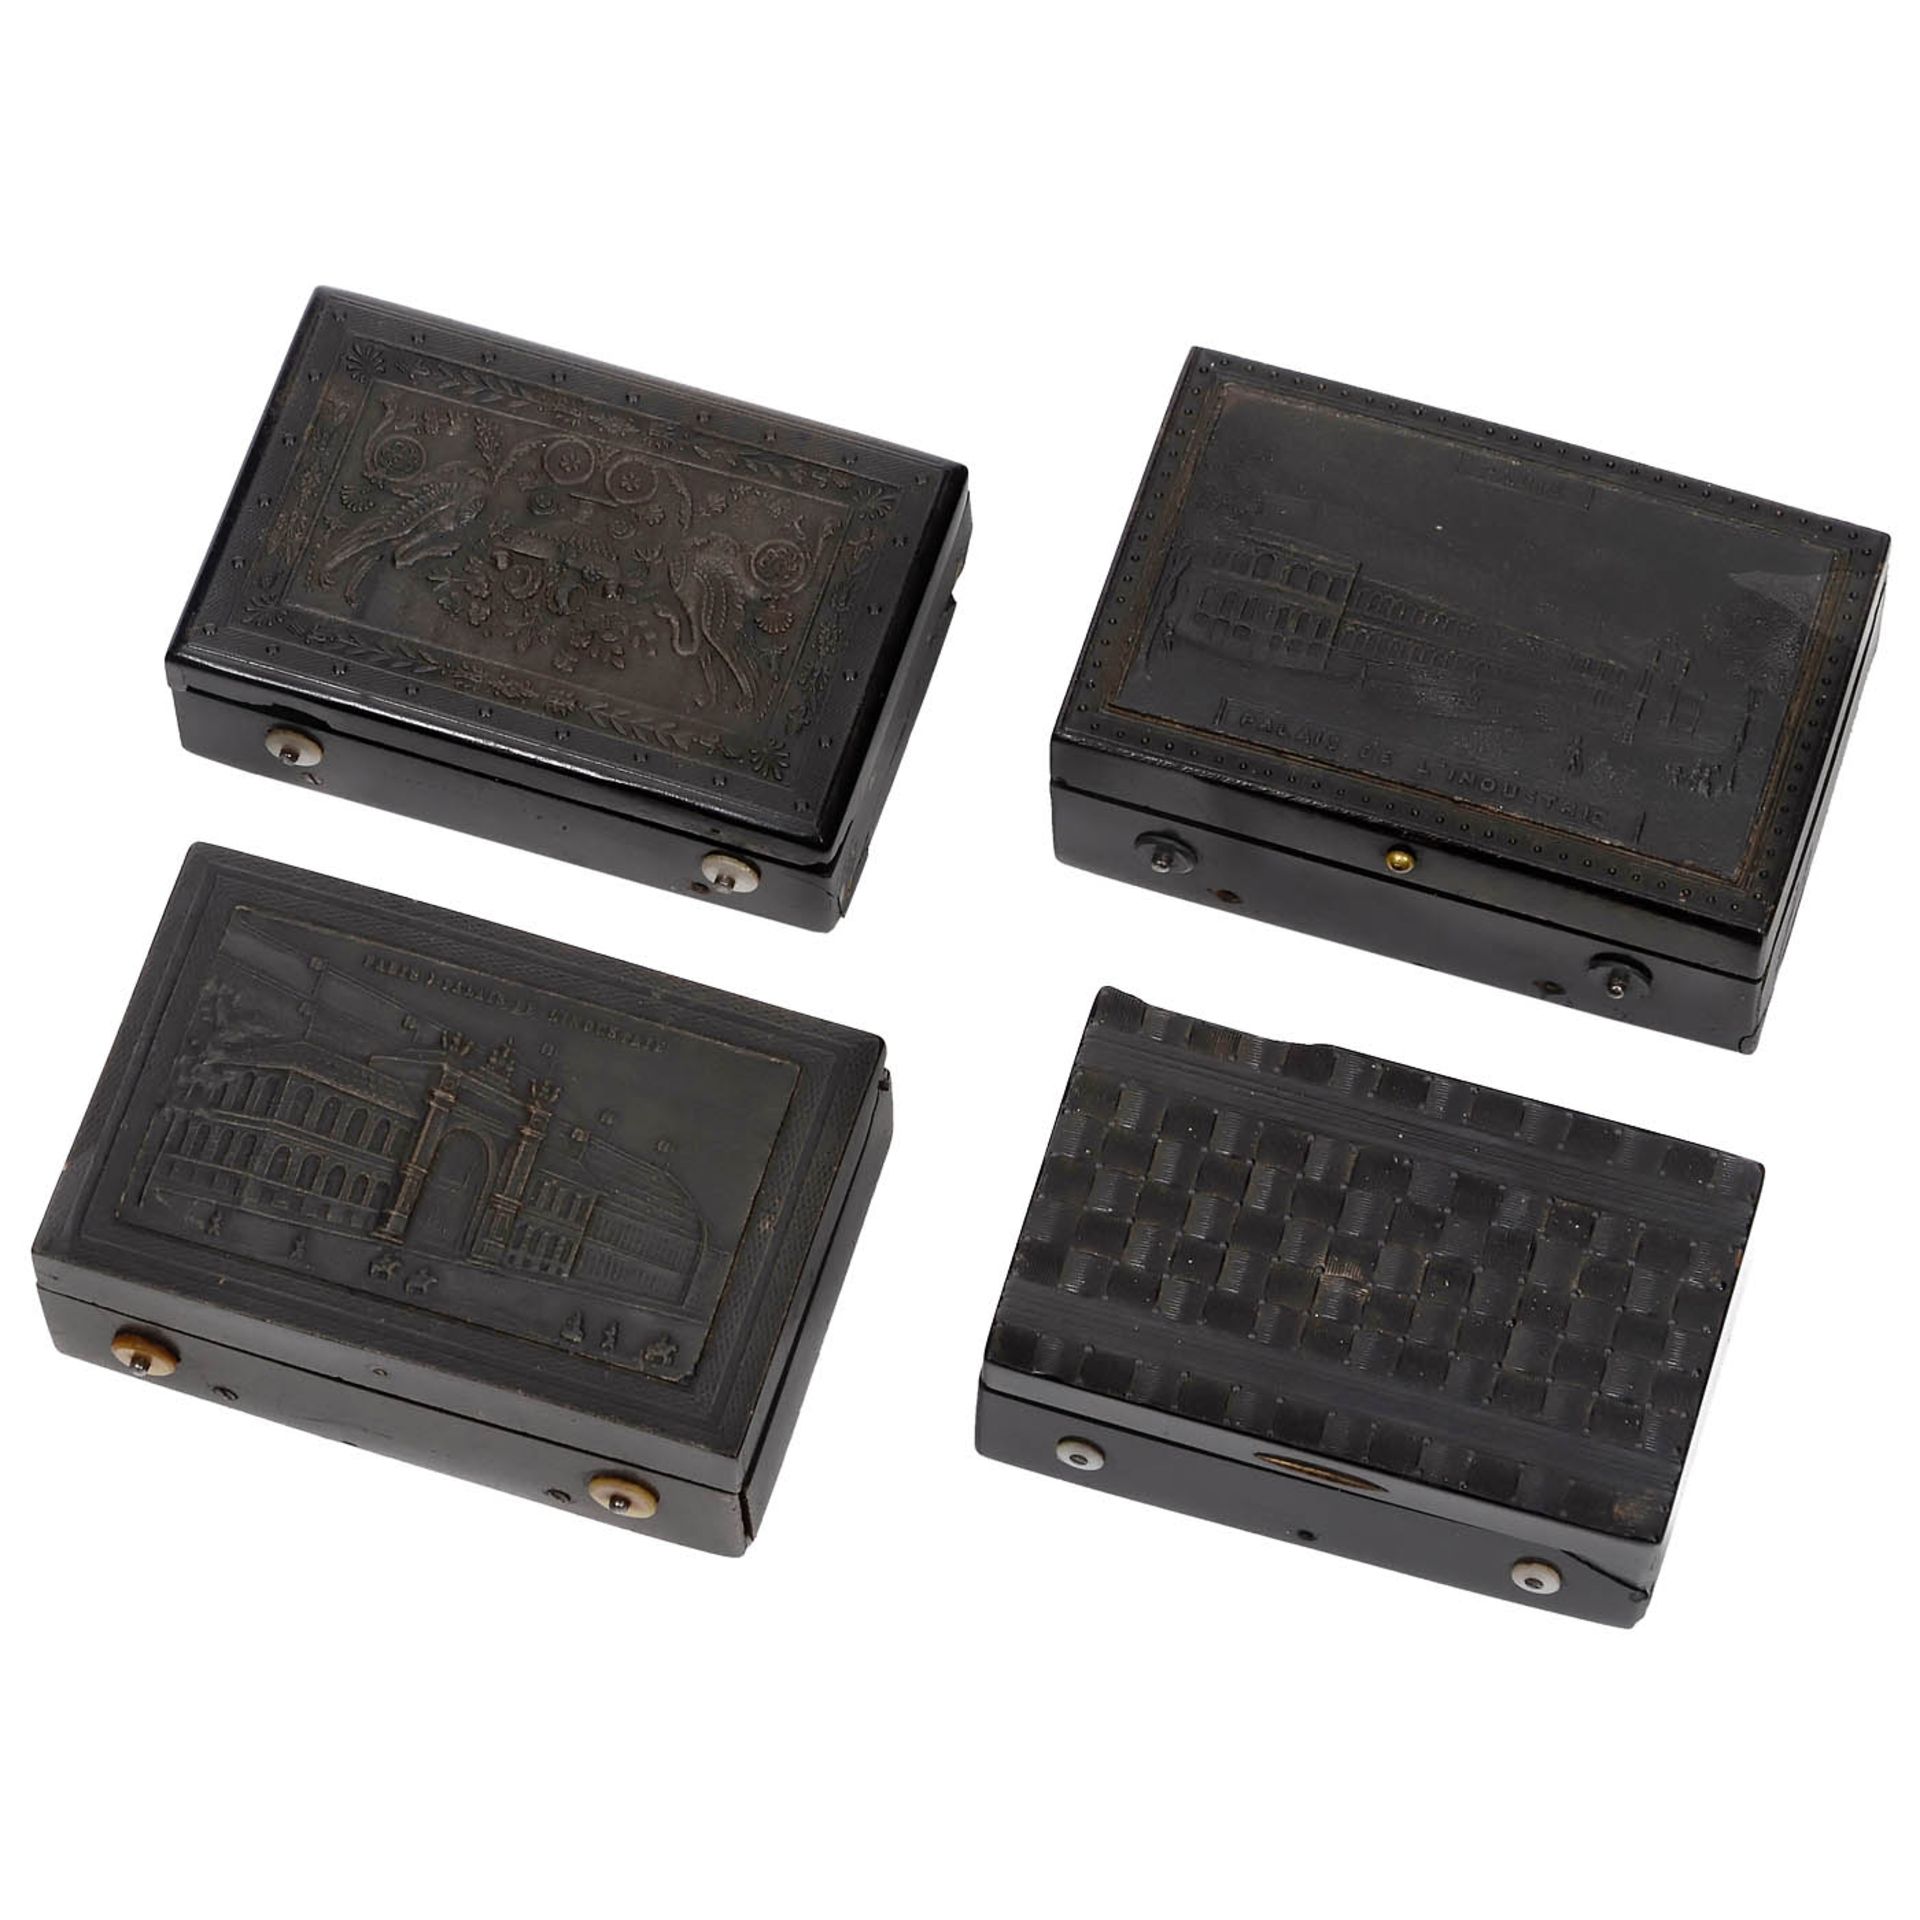 4 Musical Composition Snuff Boxes for Repair, c. 1860 - Image 2 of 2